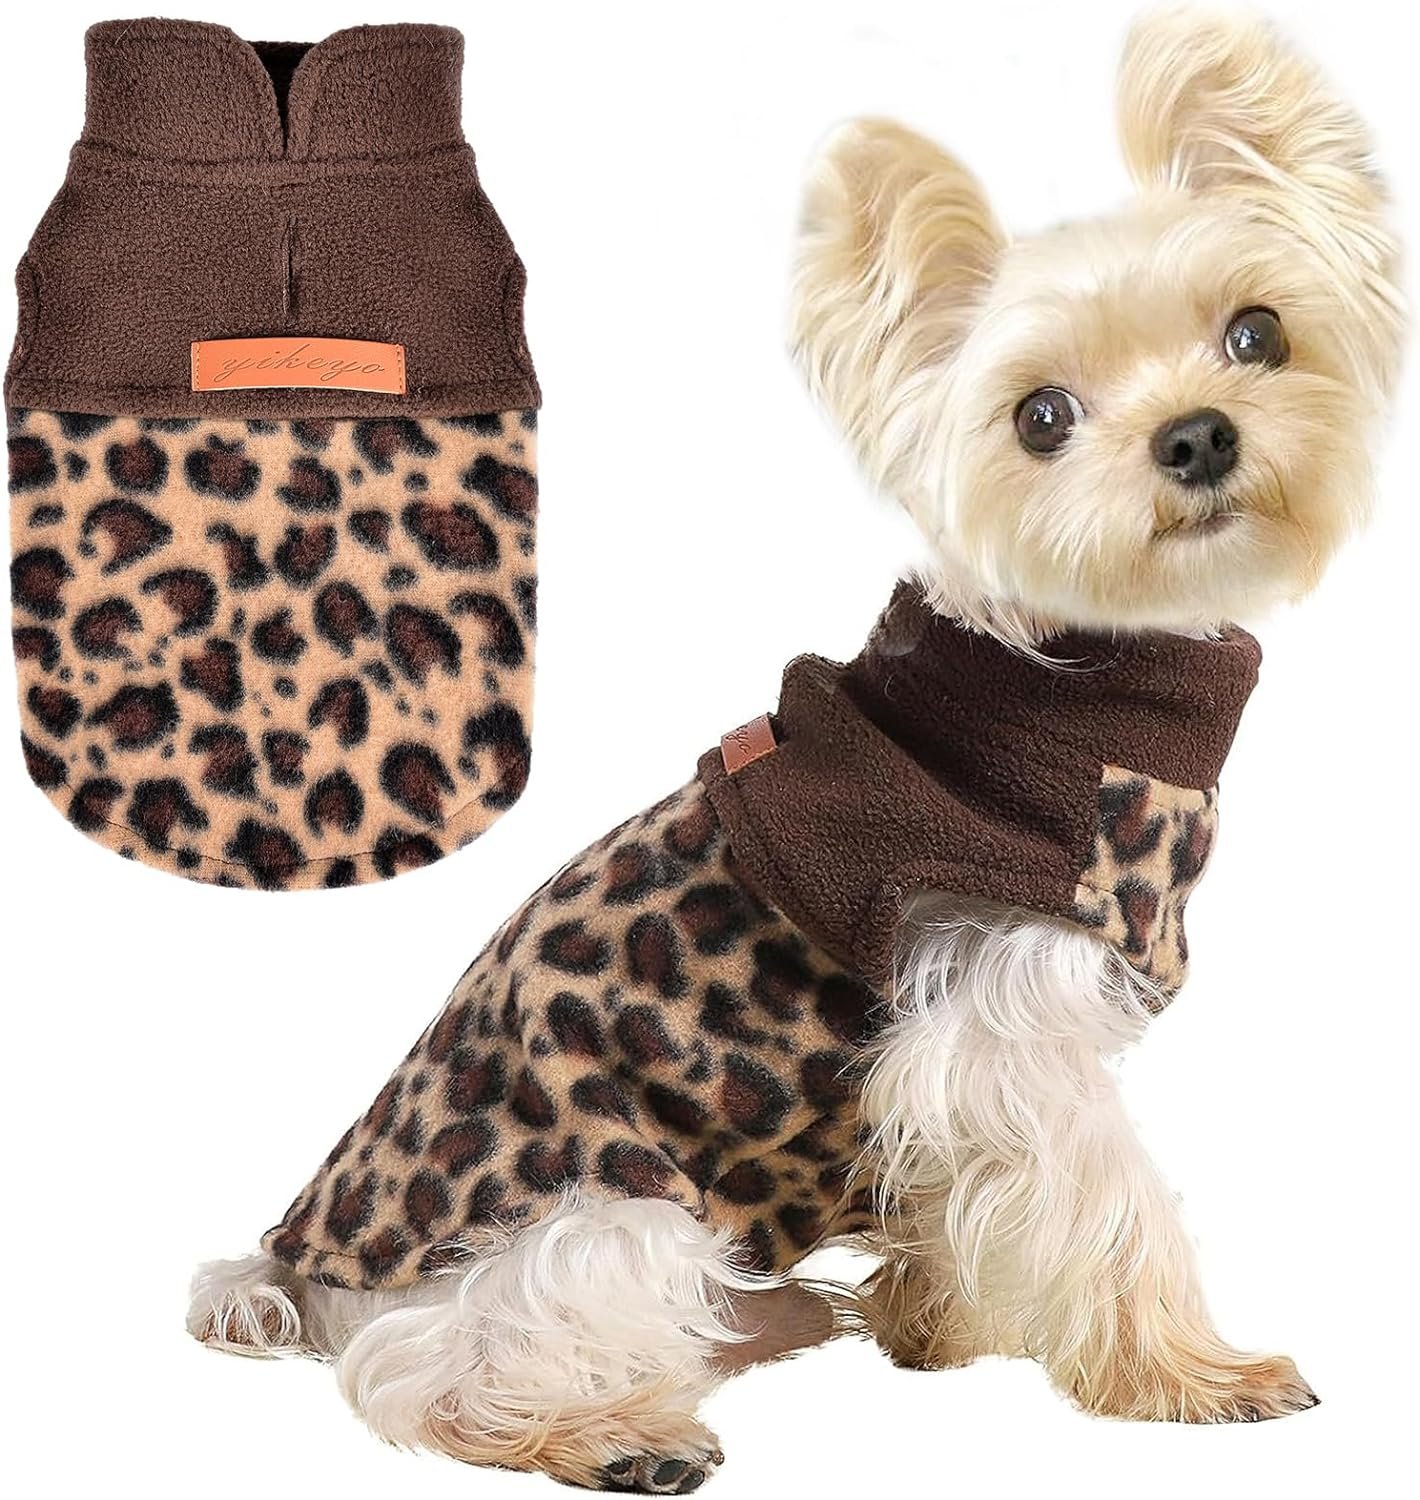 Fleece Vest Dog Sweater Leopard Dog Clothes for Small Dogs Boy or Girl Warm Pullover Fleece Dog Sweaters Winter Small Dog Sweater Coat - Cold Weather Pet Clothes Cat Sweater (XX-Small, Leopard)